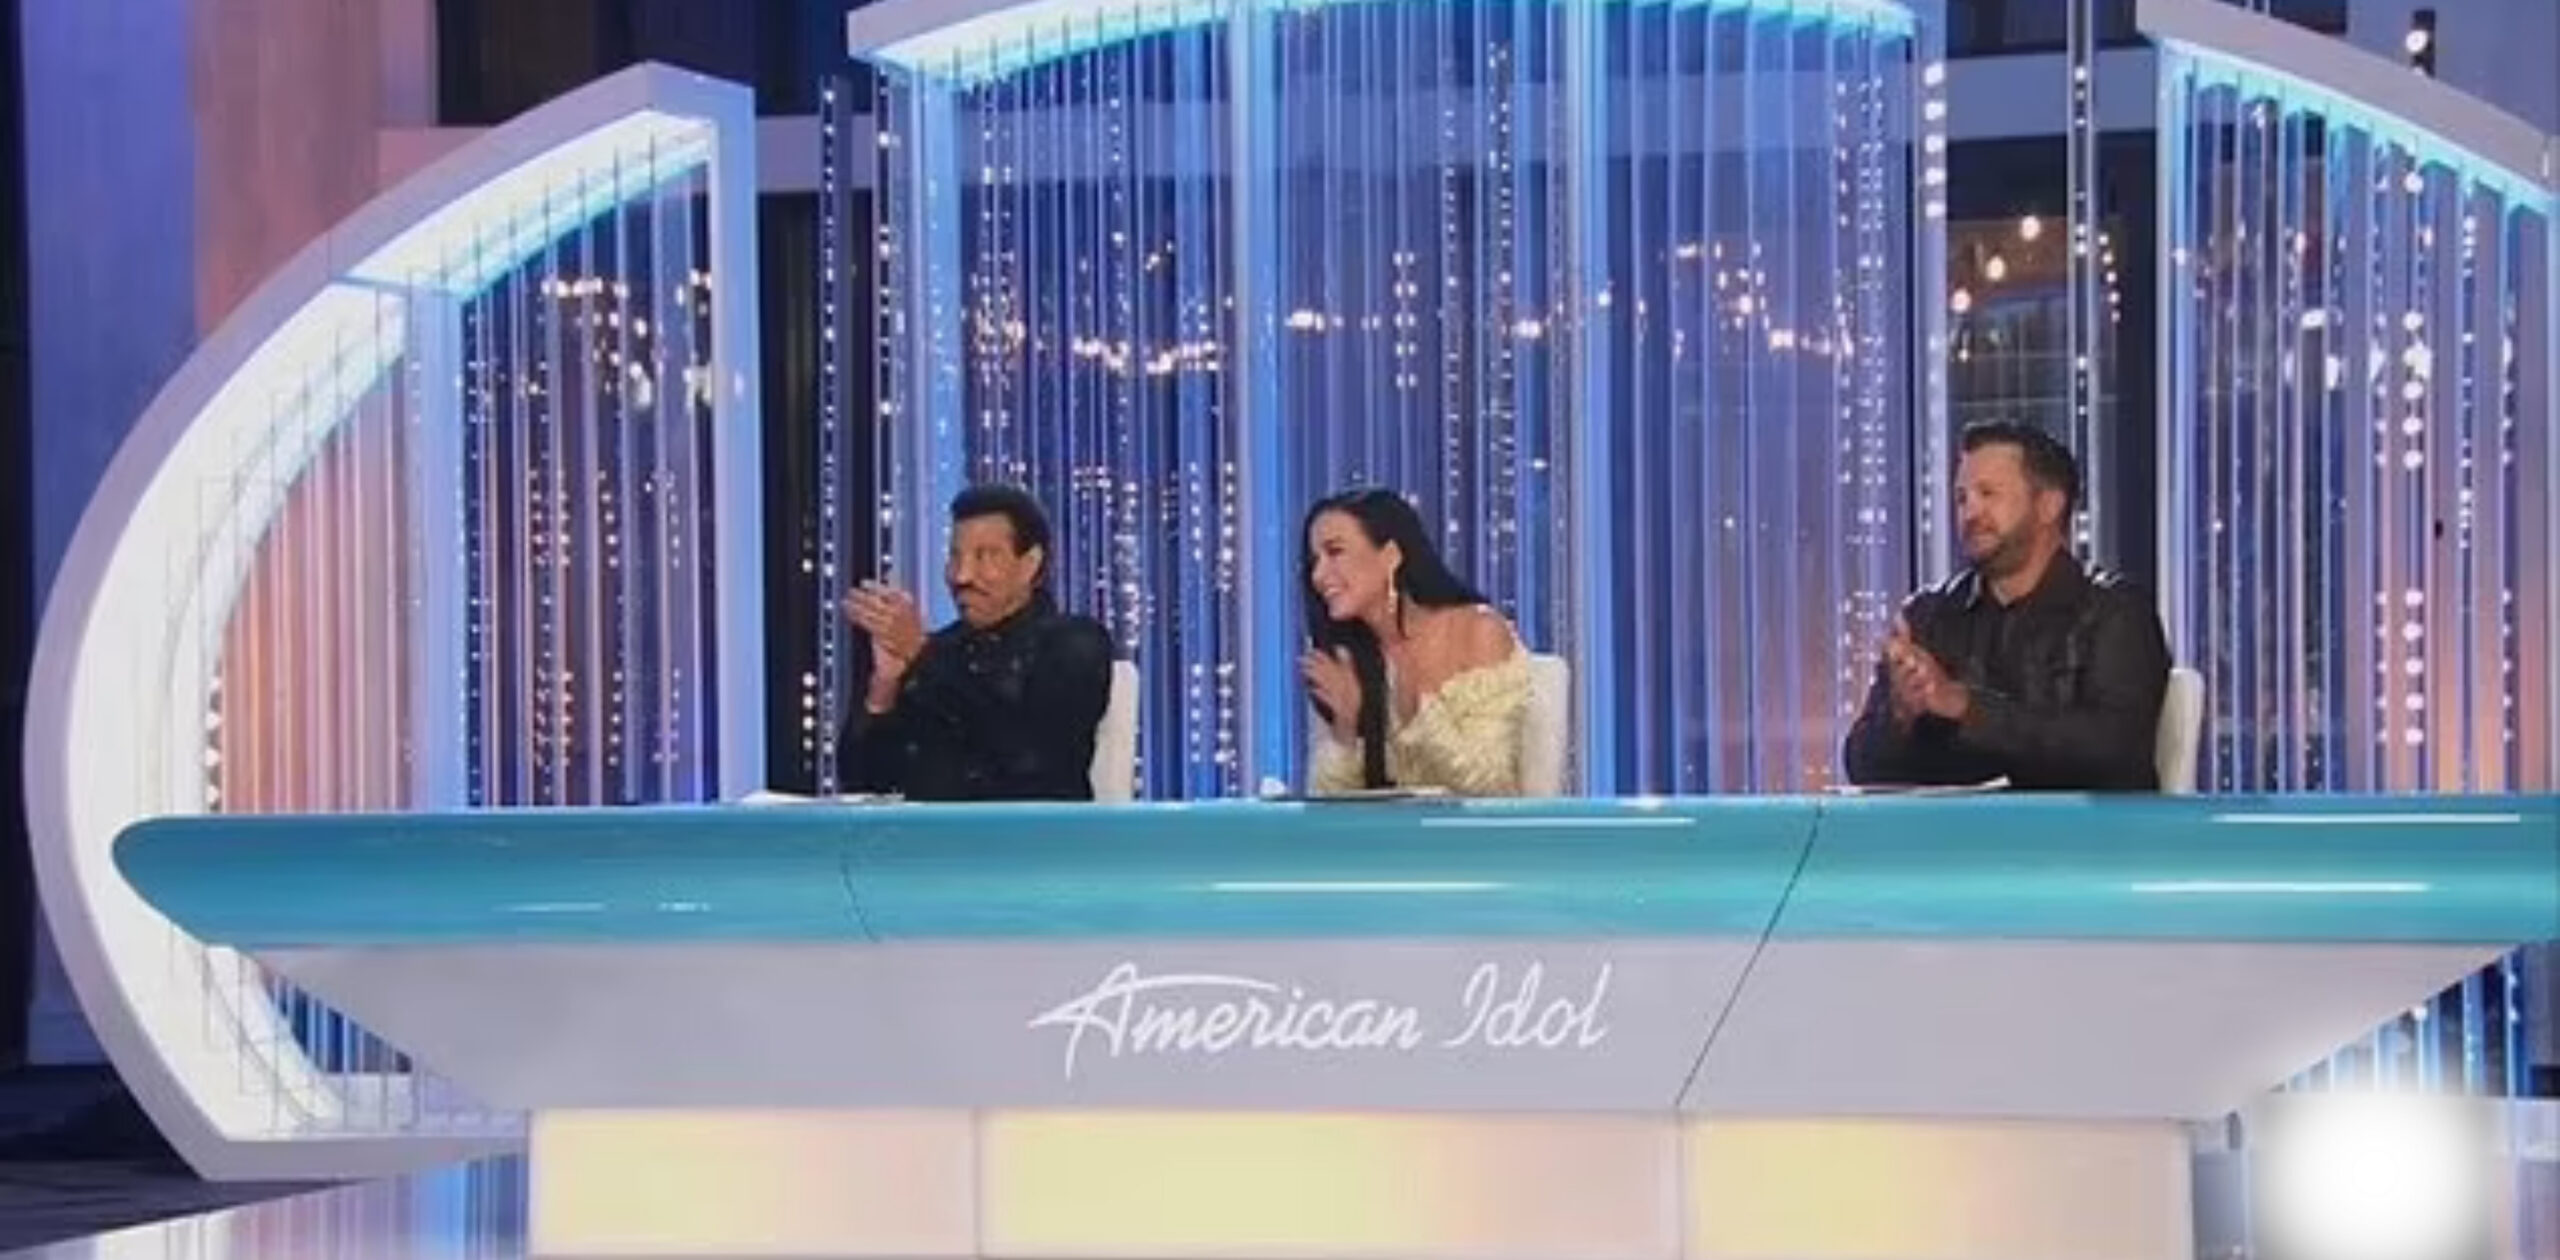 American Idol: Katy Perry Tears Up as McKenna Brinholt Meets Her Family for the First Time on ABC's Season 22 Premiere